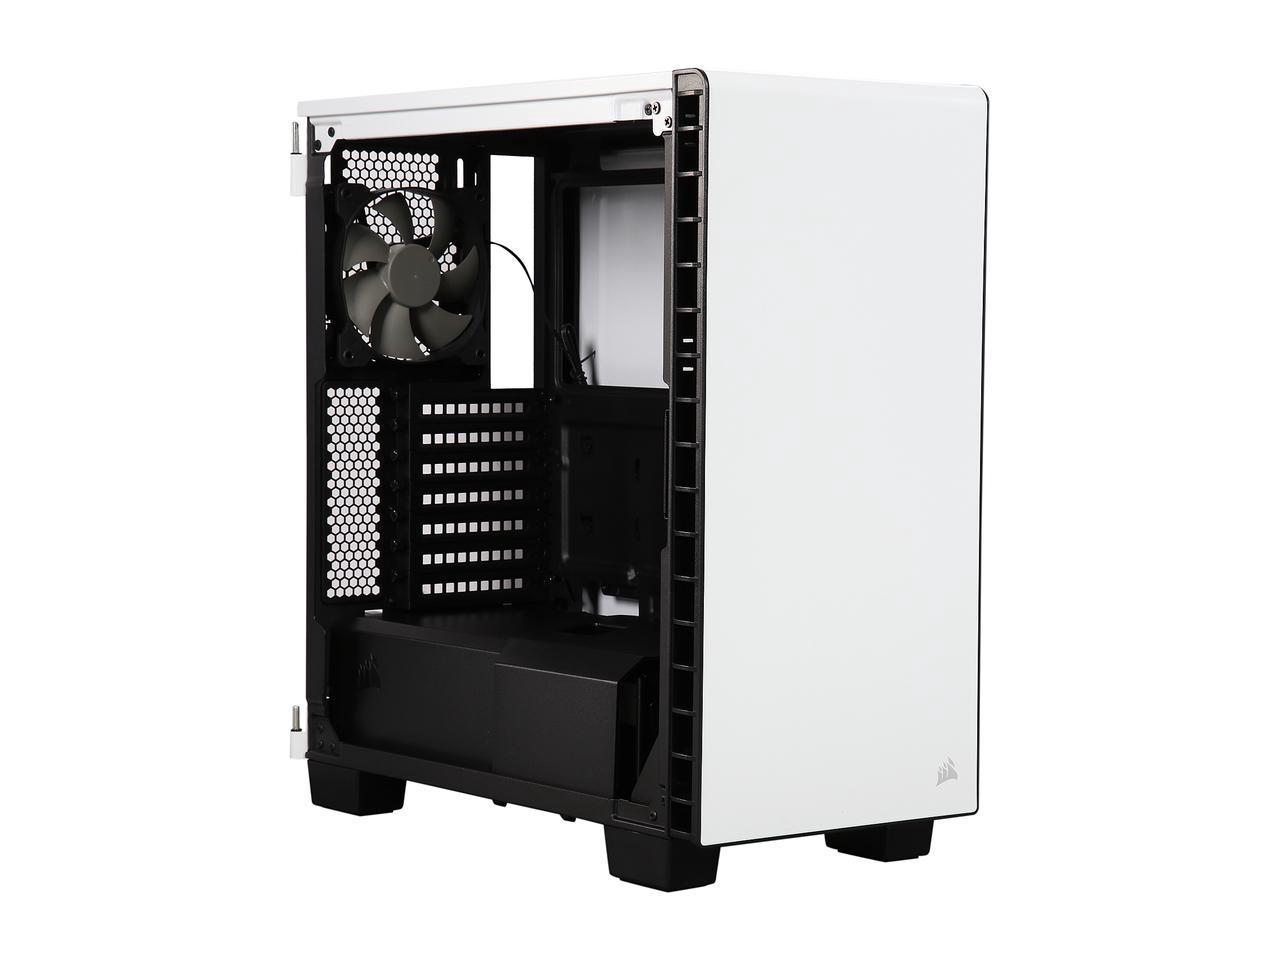 Seaboard Skadelig Jet Corsair Carbide Clear 400C (CC-9011095-WW), Clear Side Panel White Steel  ATX Mid Tower Computer Case ATX - NO Power Supply